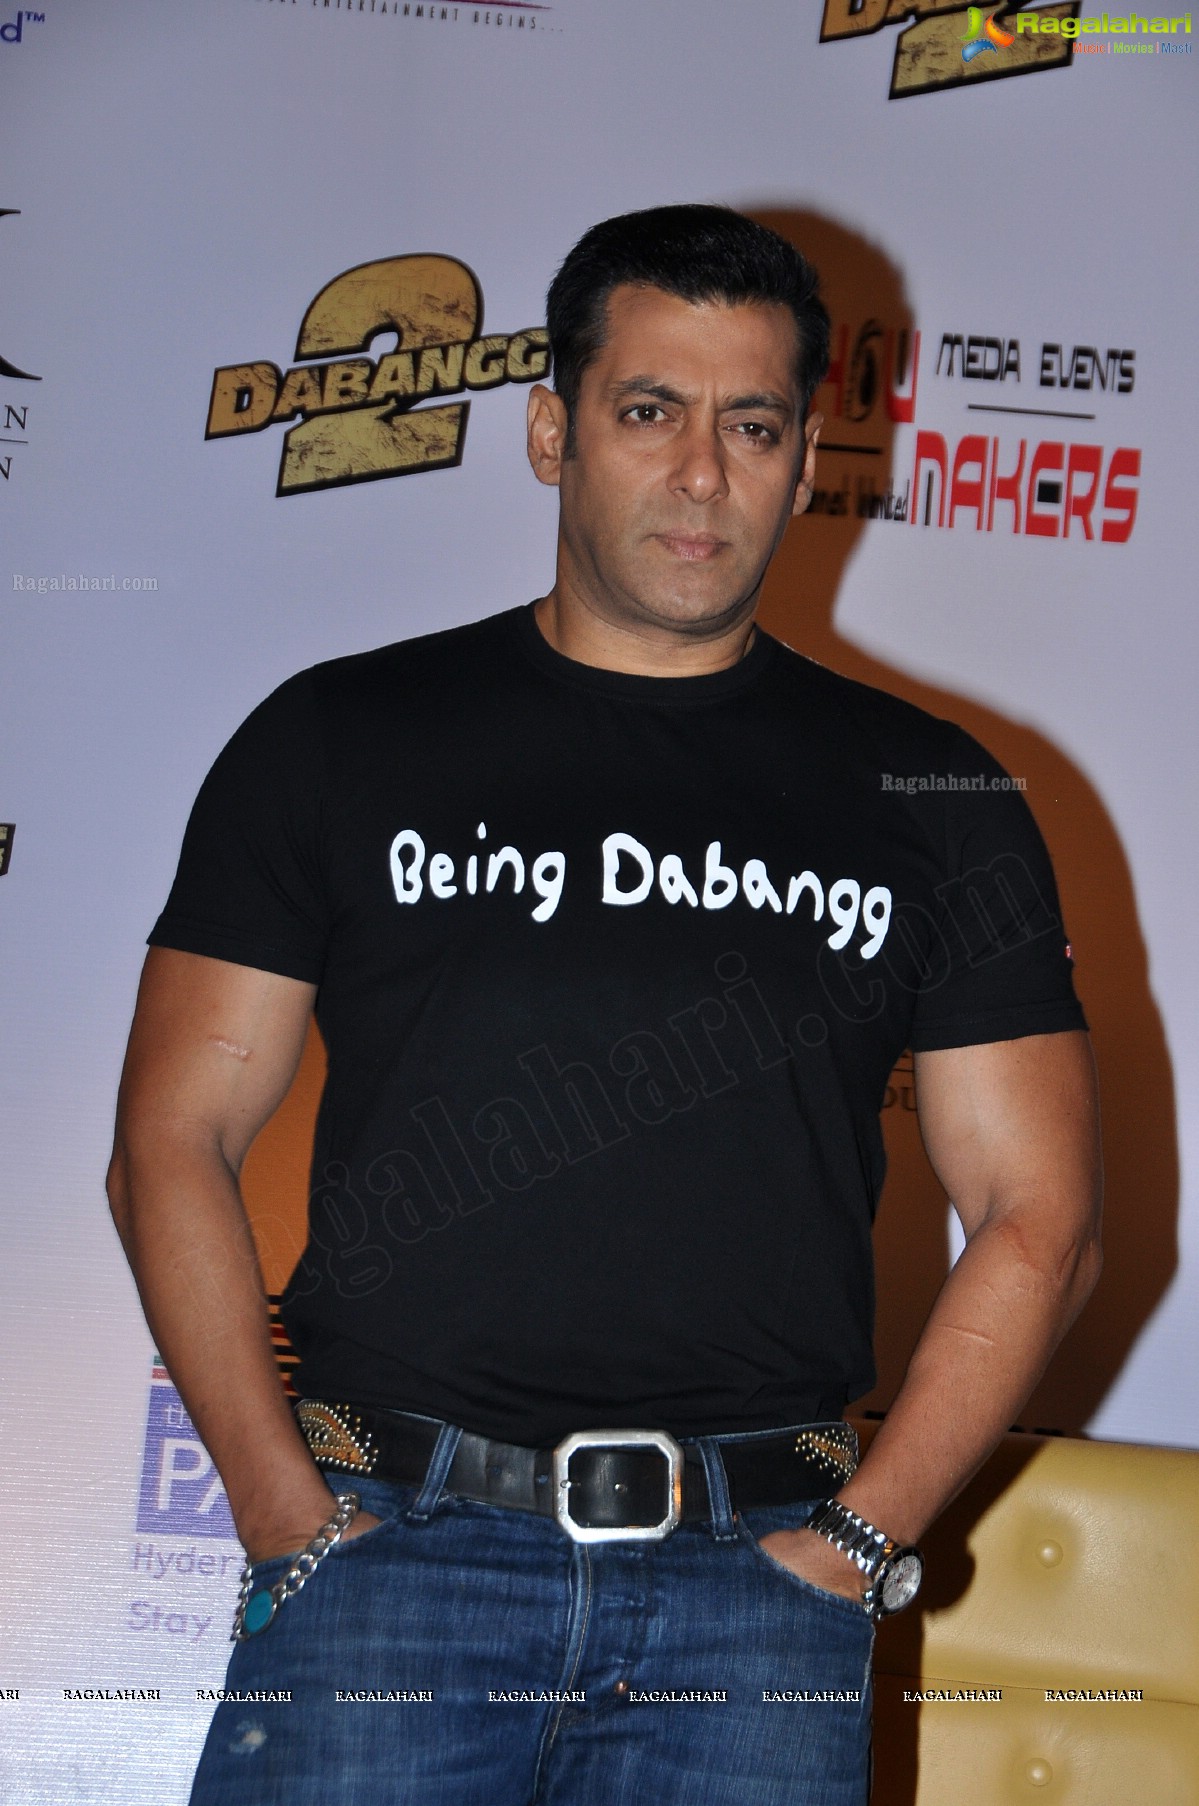 Dabangg 2 Promotions at The Park, Hyderabad